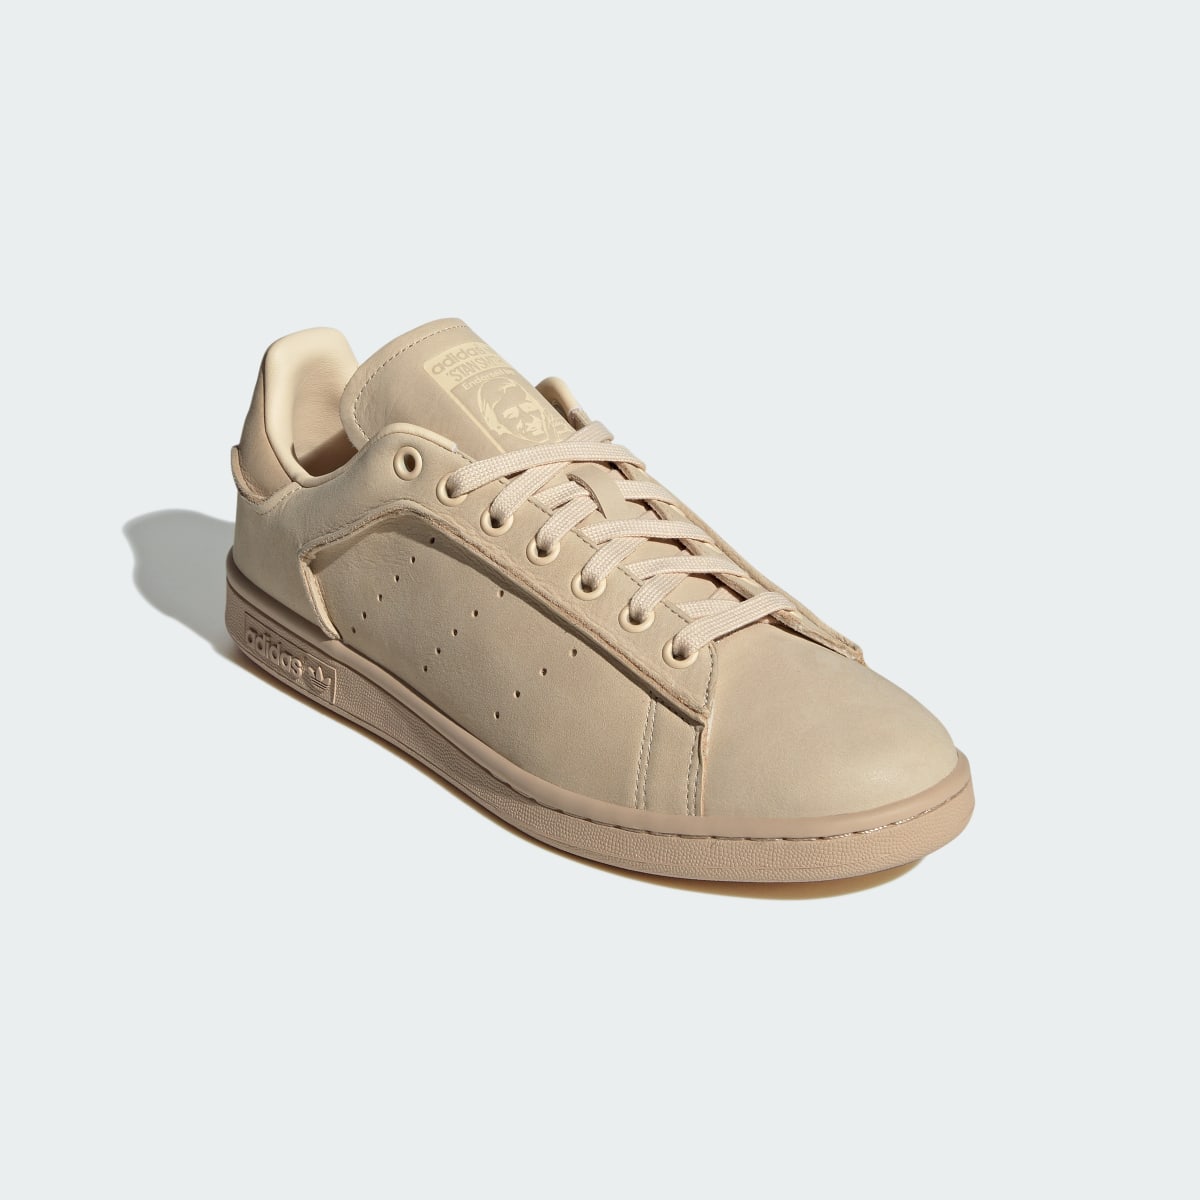 Adidas Chaussure Stan Smith Luxe. 5